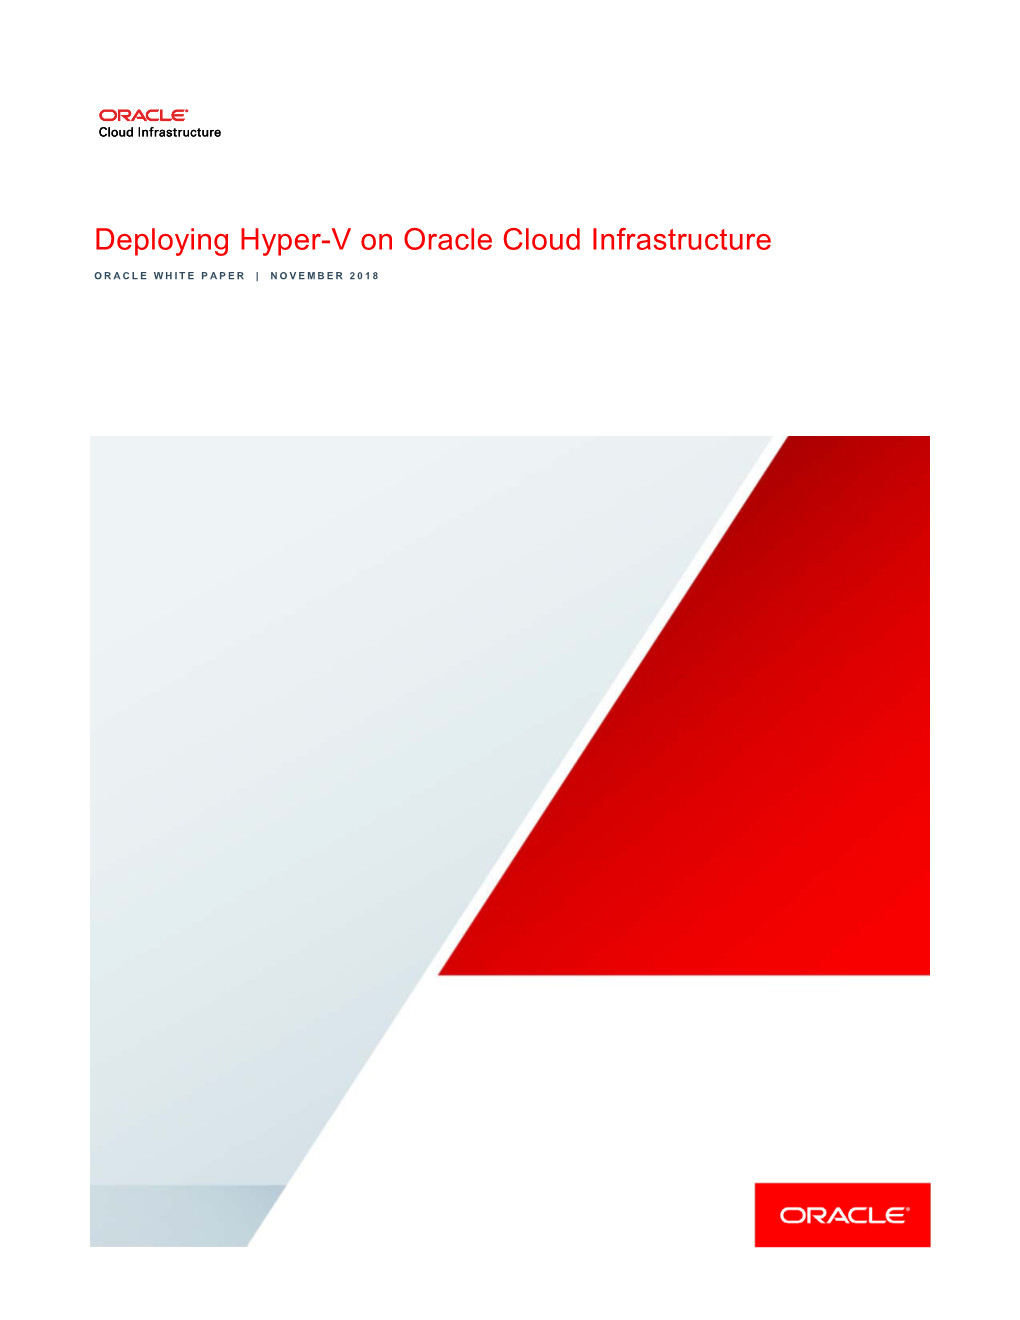 Deploying Hyper-V on Oracle Cloud Infrastructure